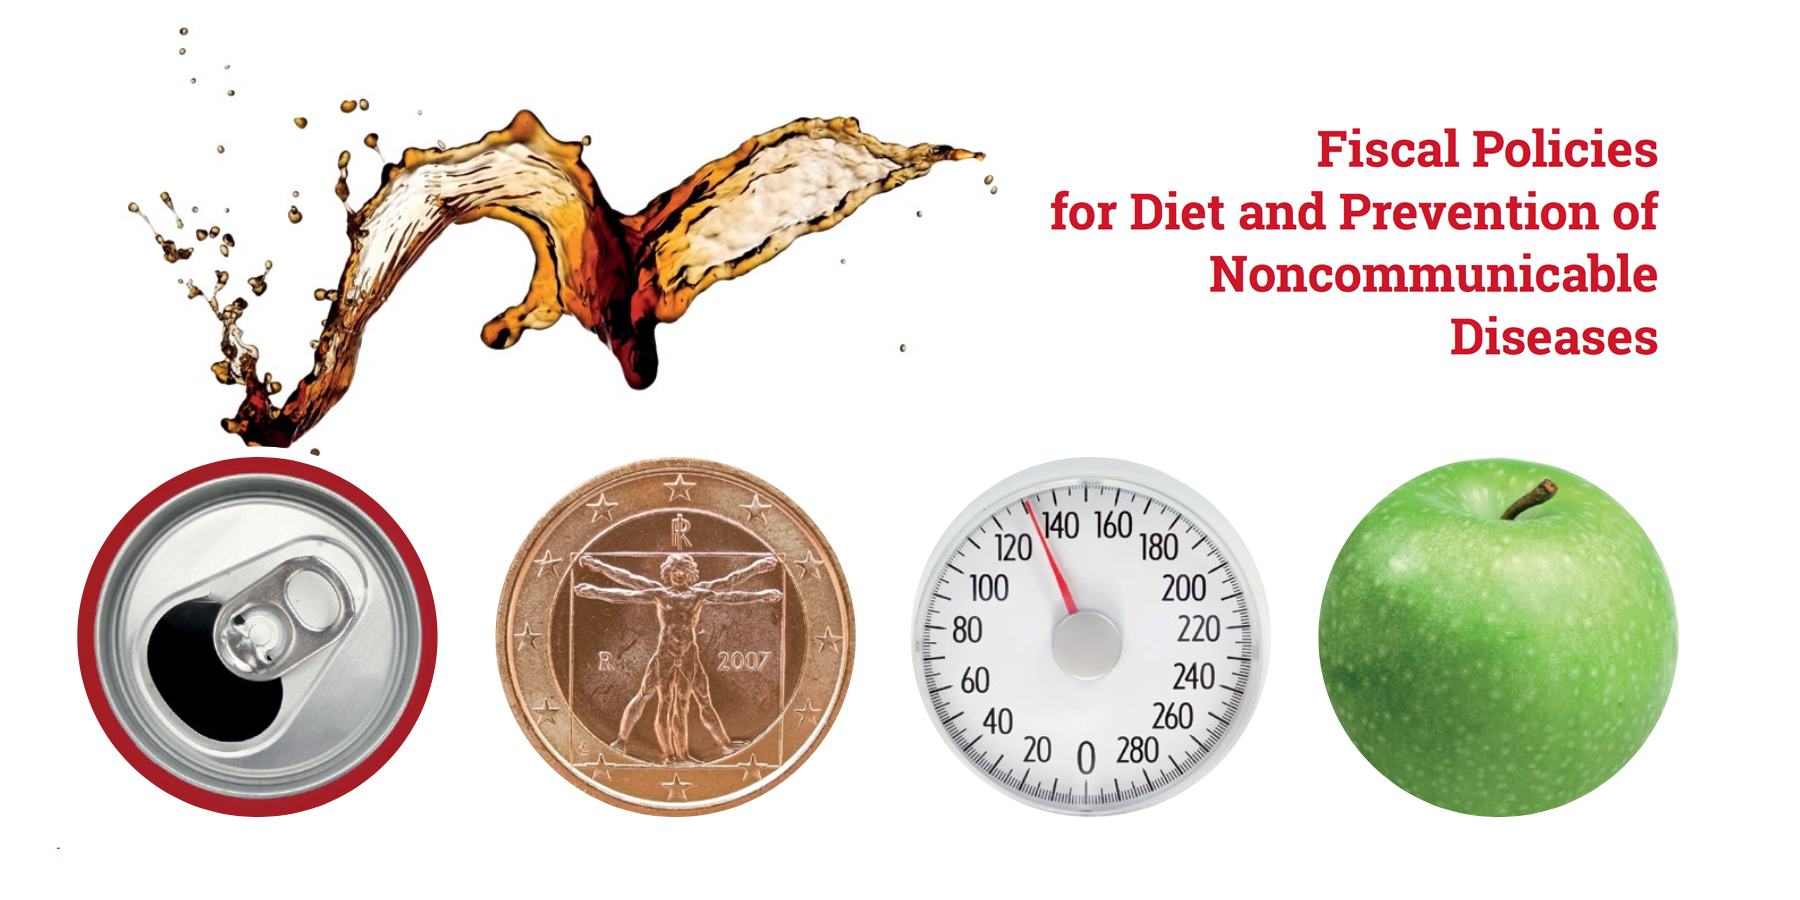 WHO Fiscal Policies for Diet and Prevention of NCDs header